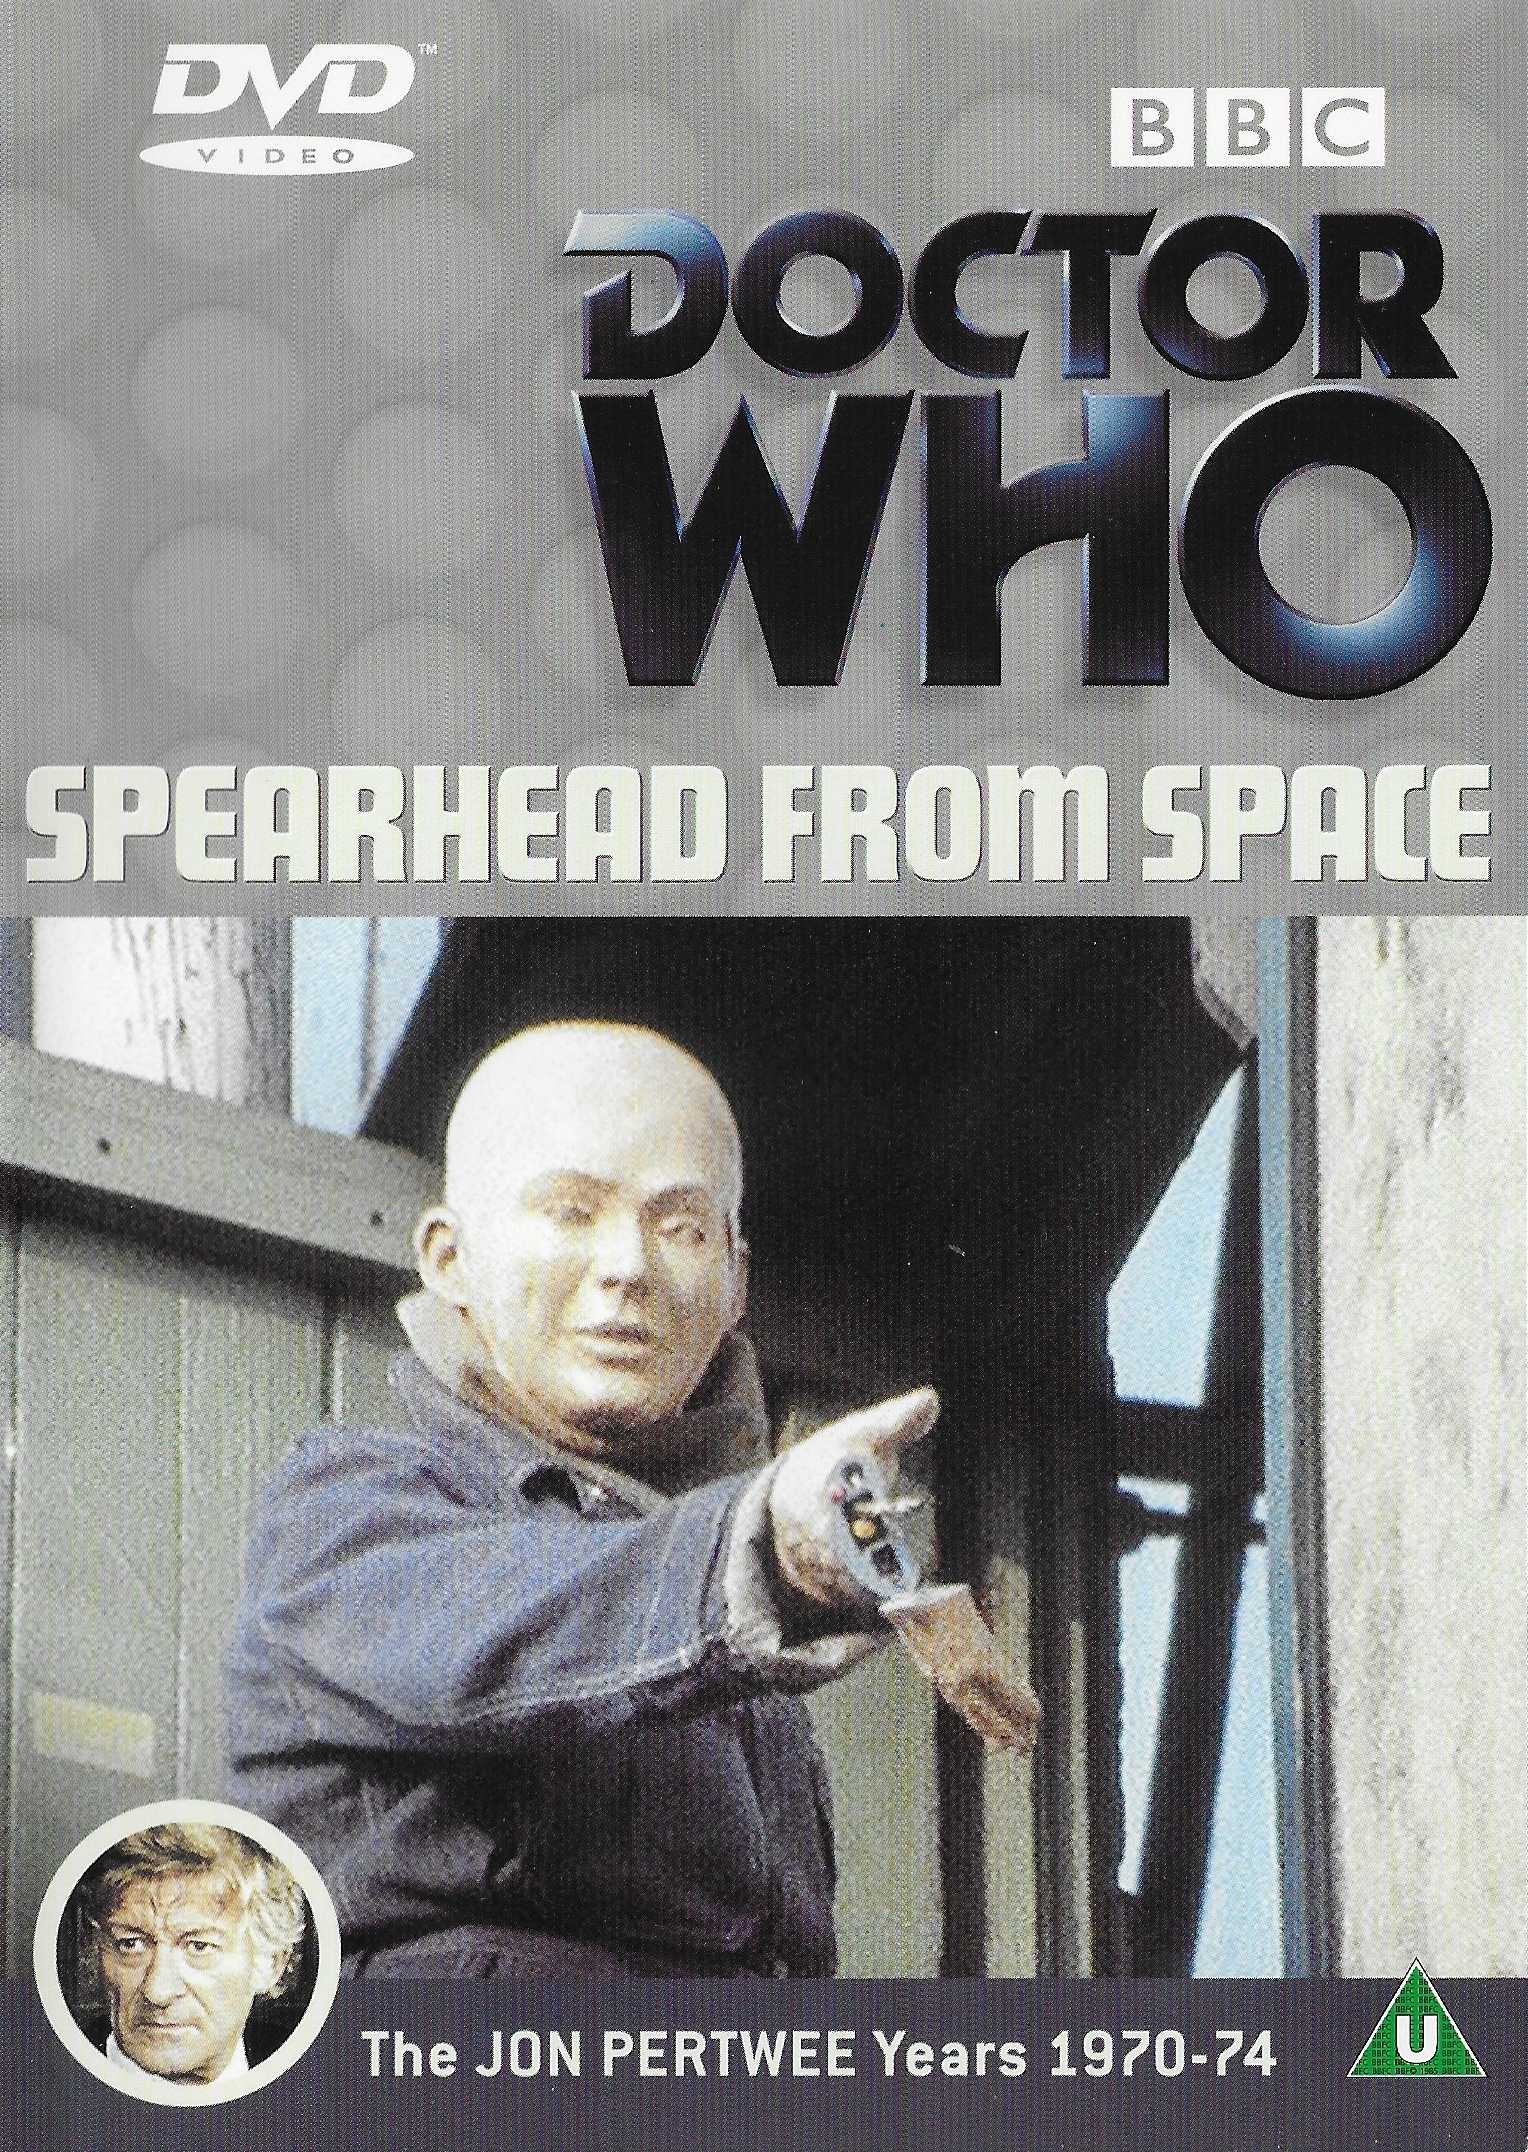 Picture of BBCDVD 1033 Doctor Who - Spearhead from space by artist Robert Holmes from the BBC dvds - Records and Tapes library